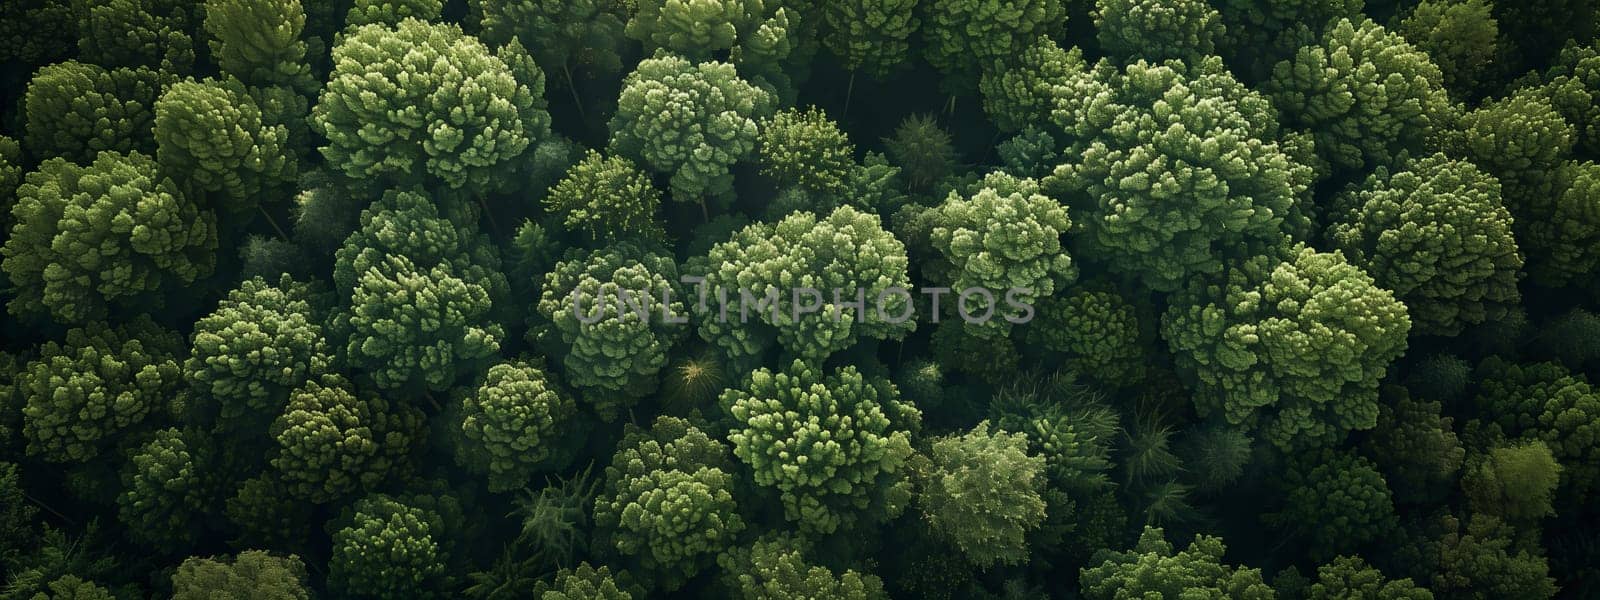 A birdseye view of a dense forest with an abundance of trees by richwolf